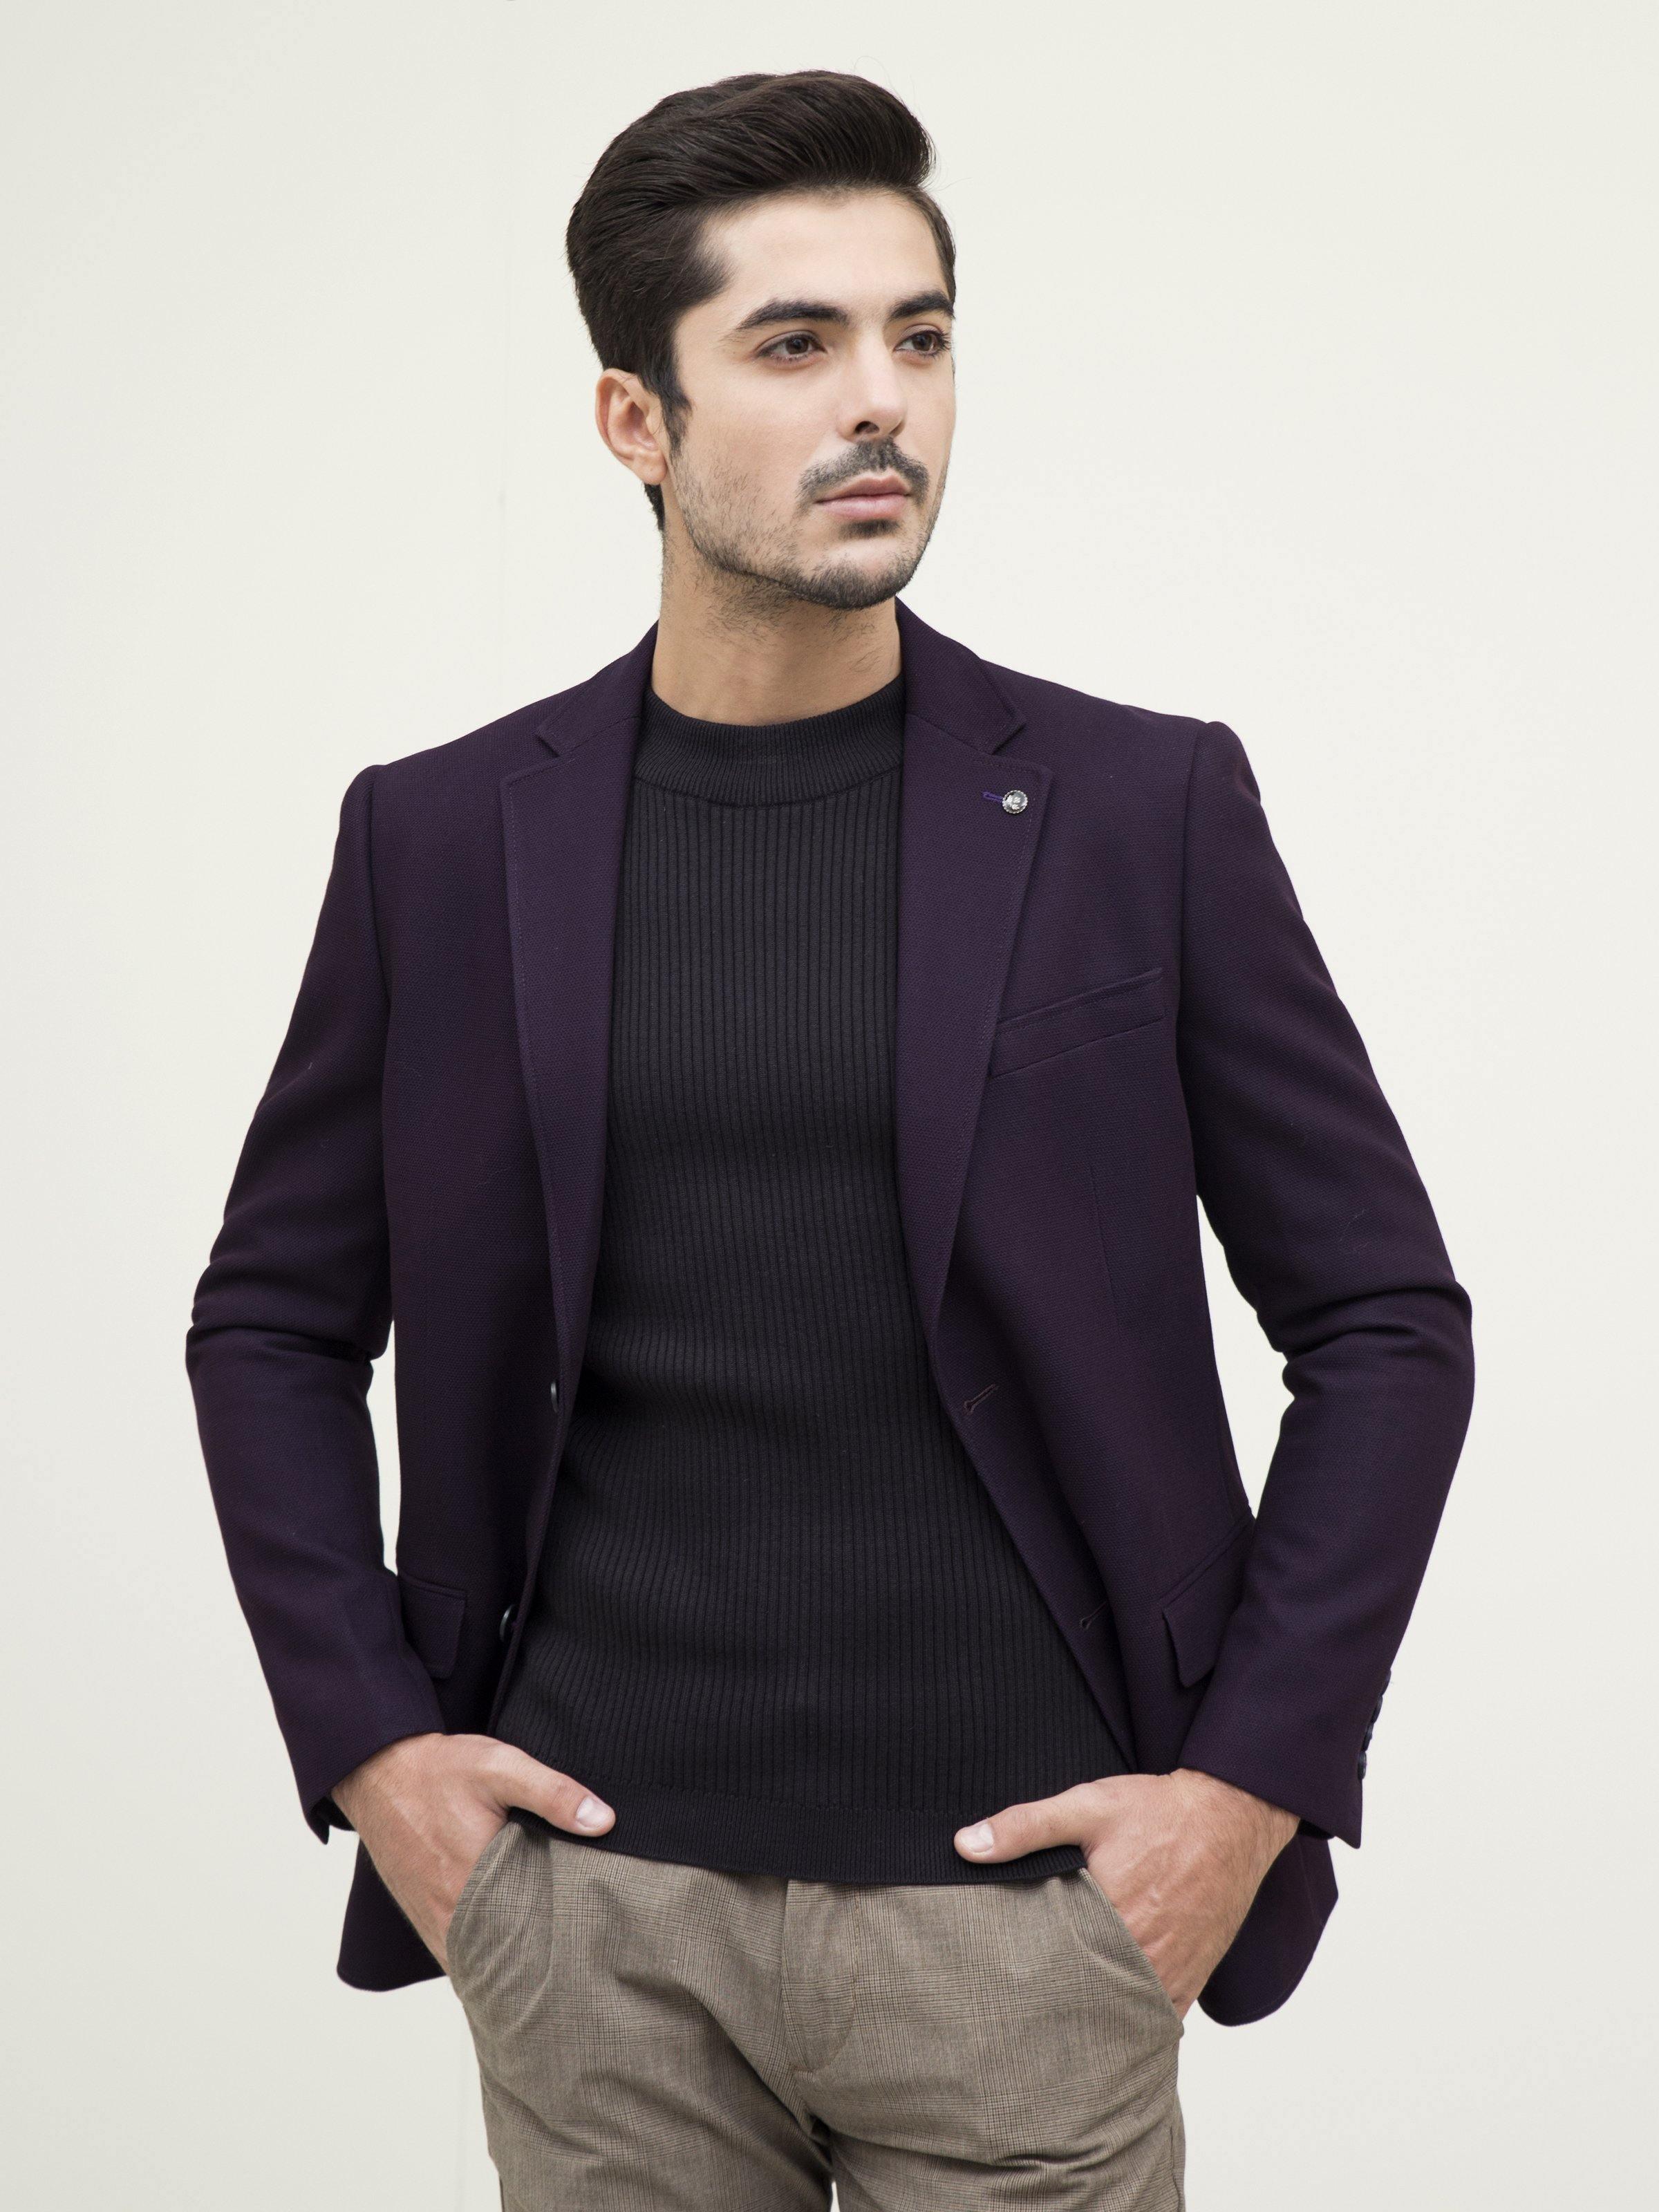 CASUAL COAT SLIM FIT PURPLE at Charcoal Clothing